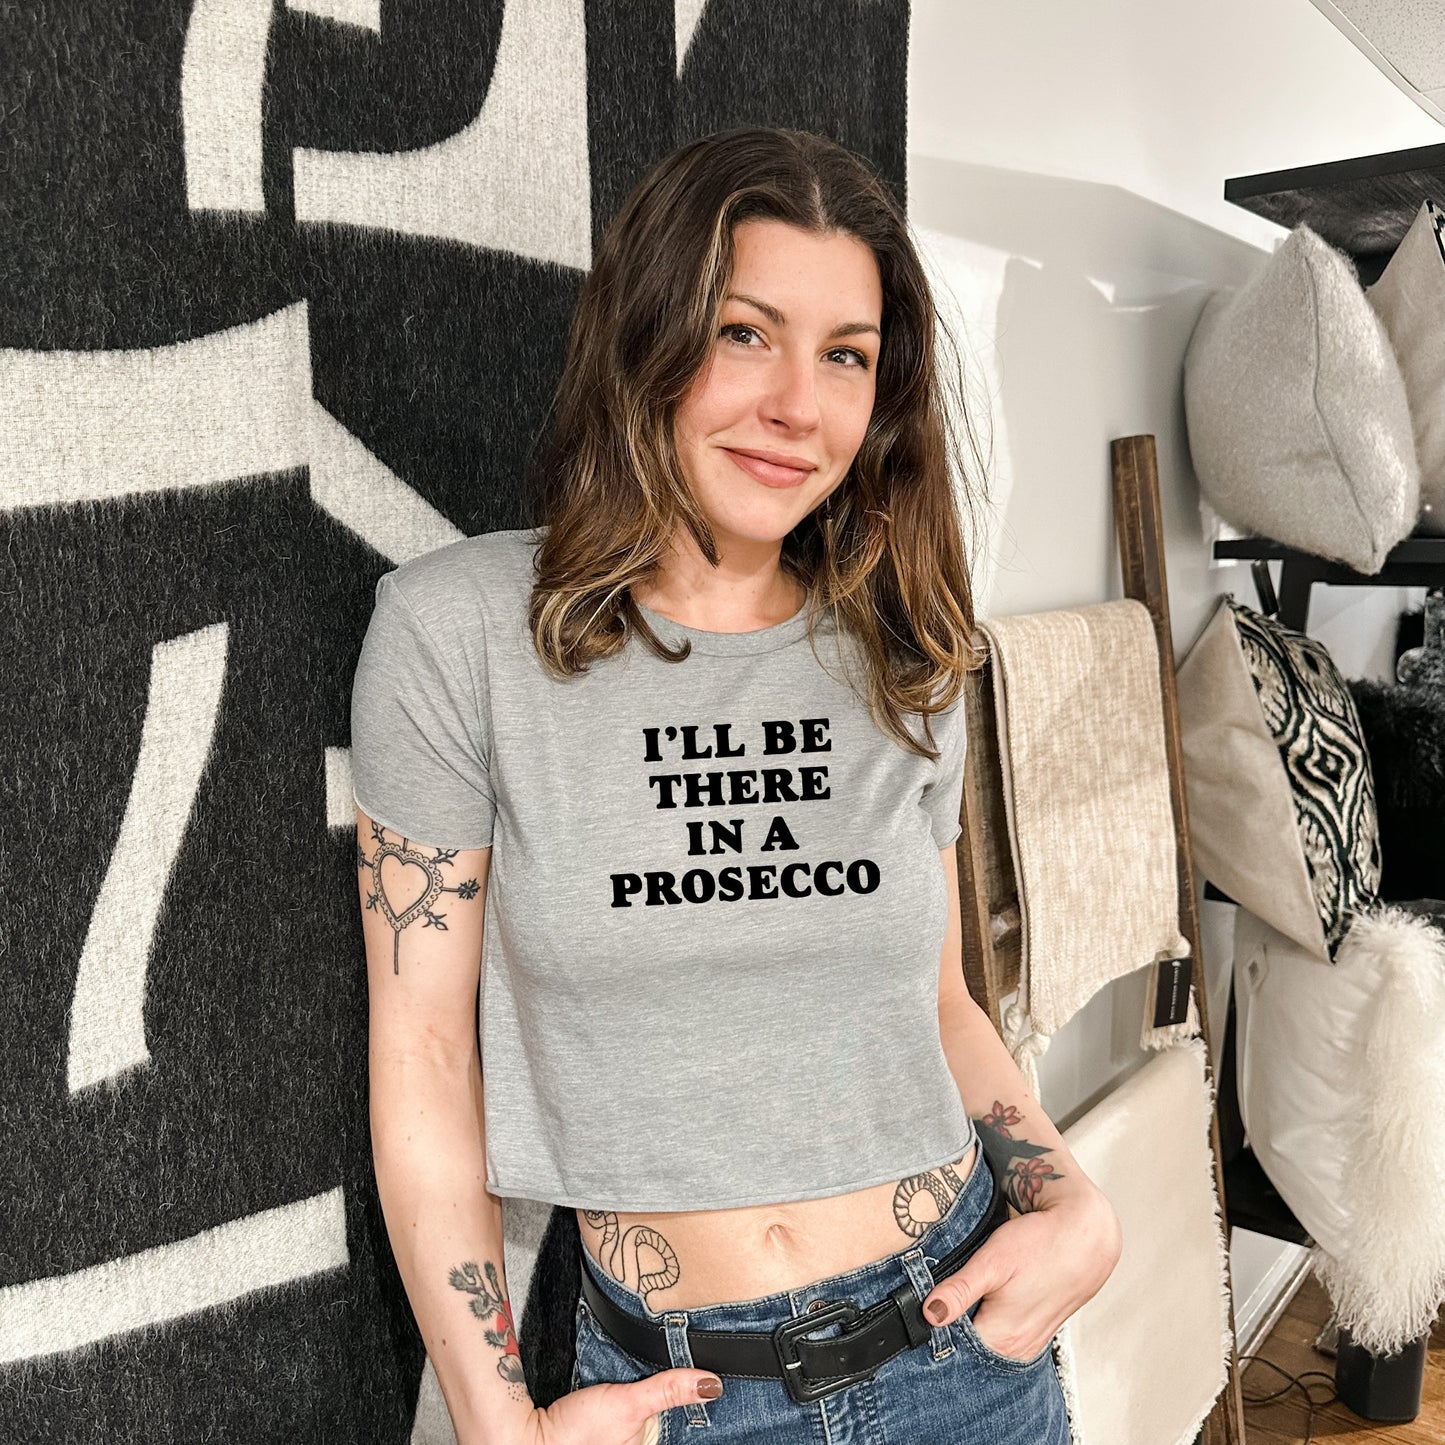 I'll Be There In a Prosecco - Bold Type - Women's Crop Tee - Heather Gray or Gold